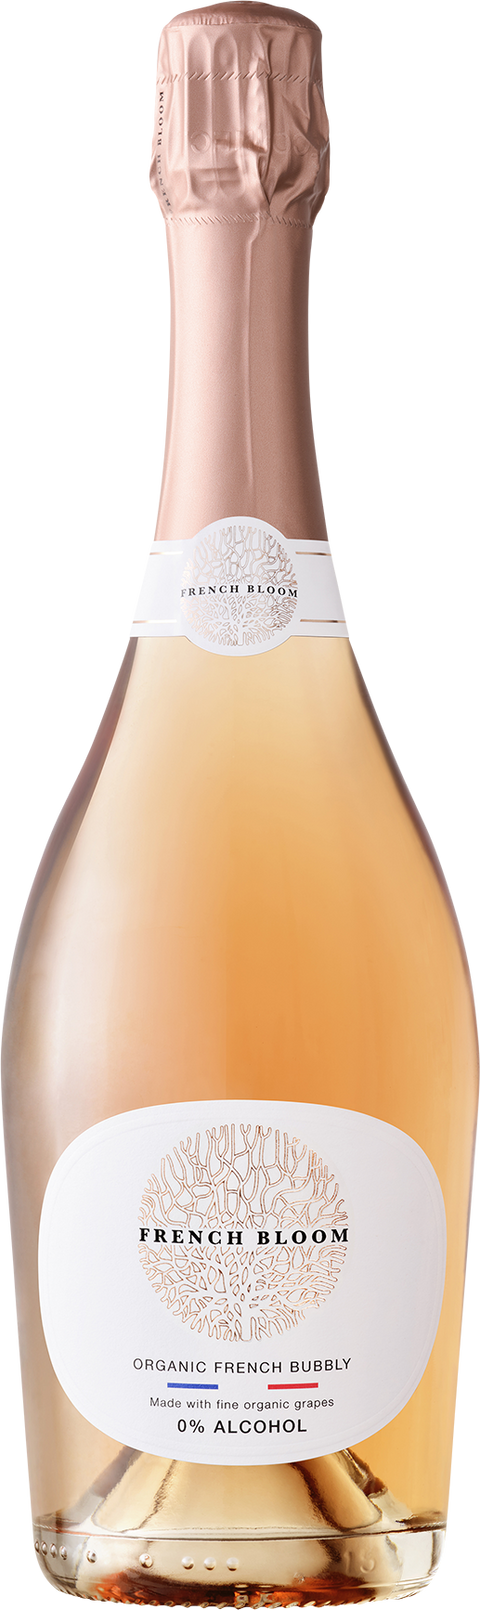 French Bloom rosé